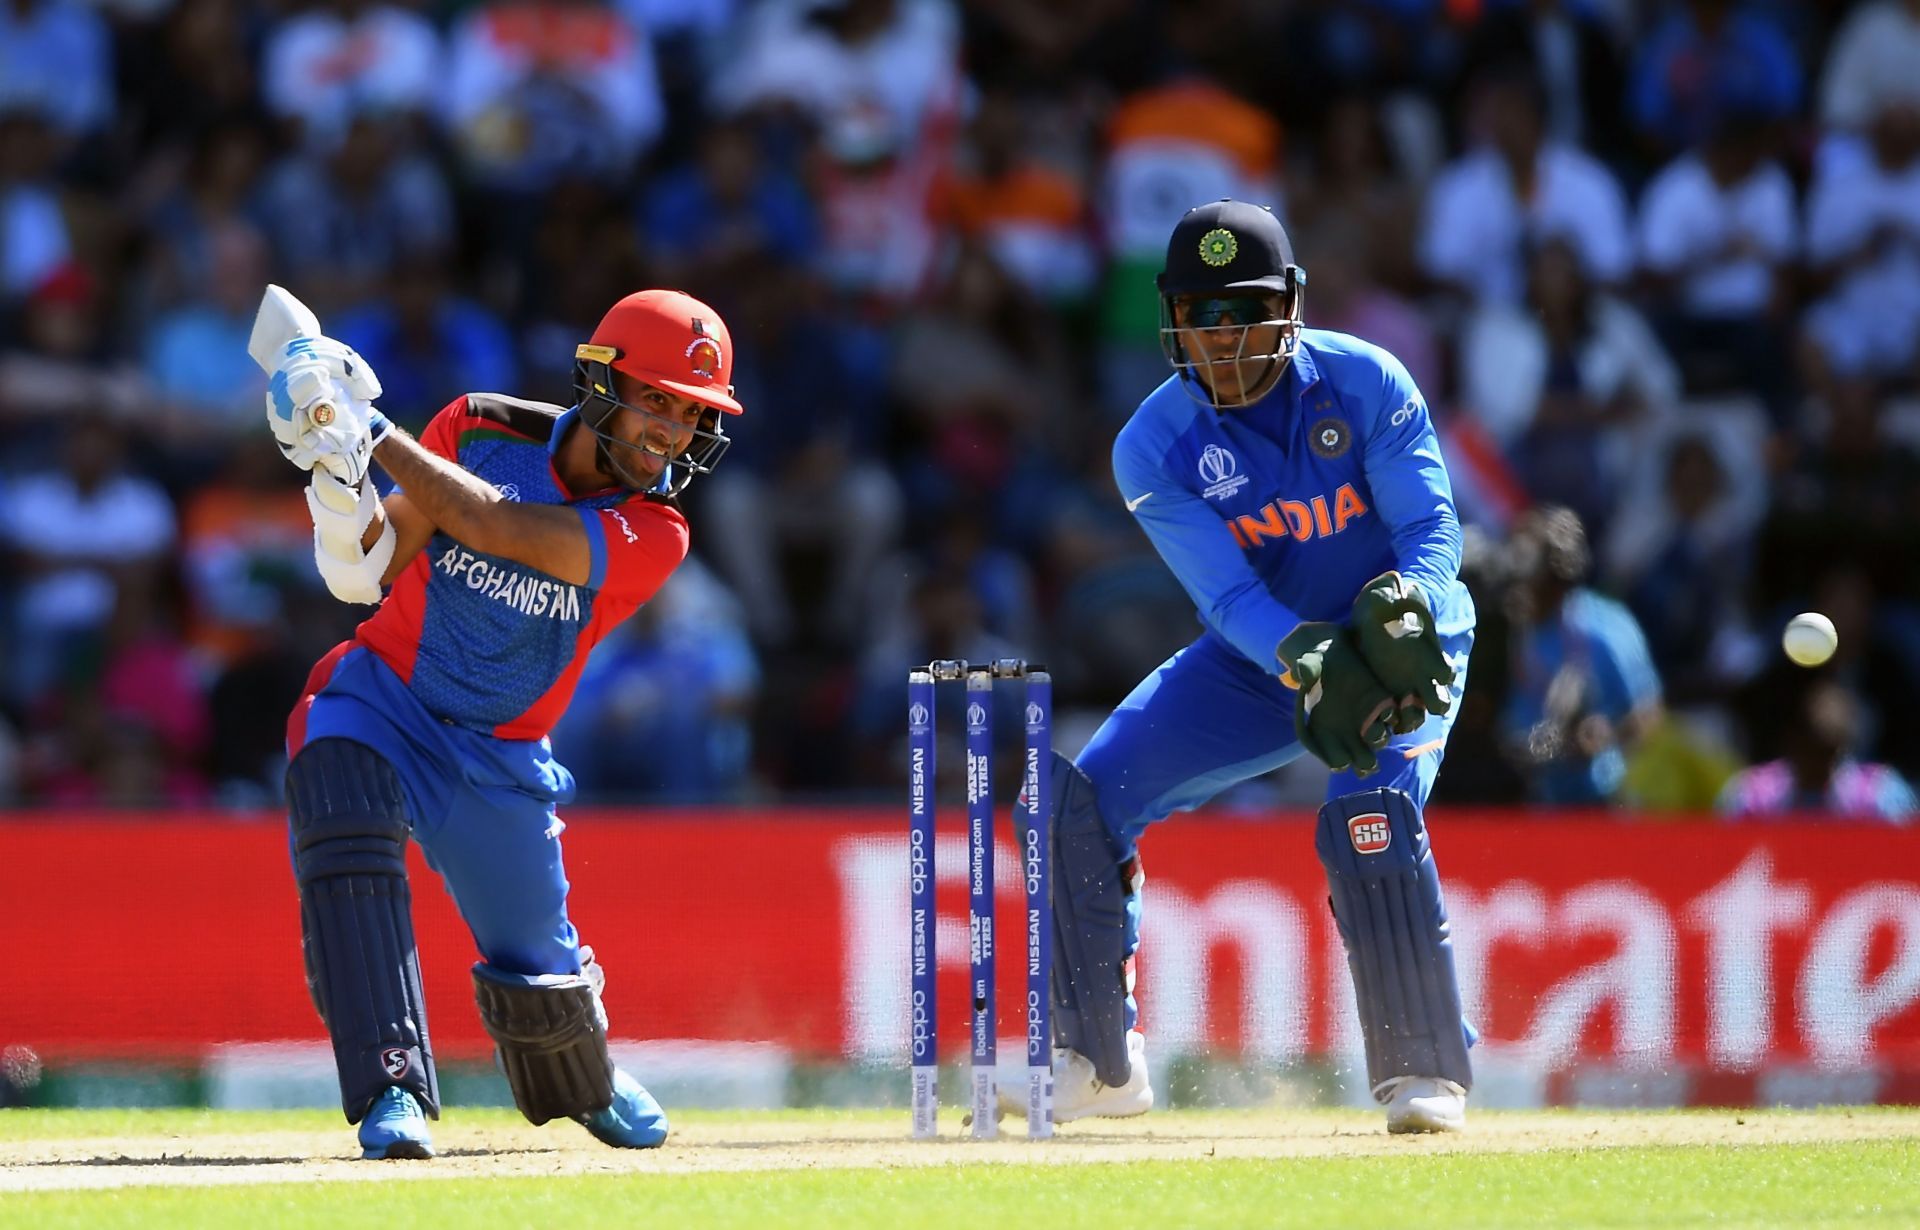 India v Afghanistan - ICC Cricket World Cup 2019 (Image courtesy: Getty Images)